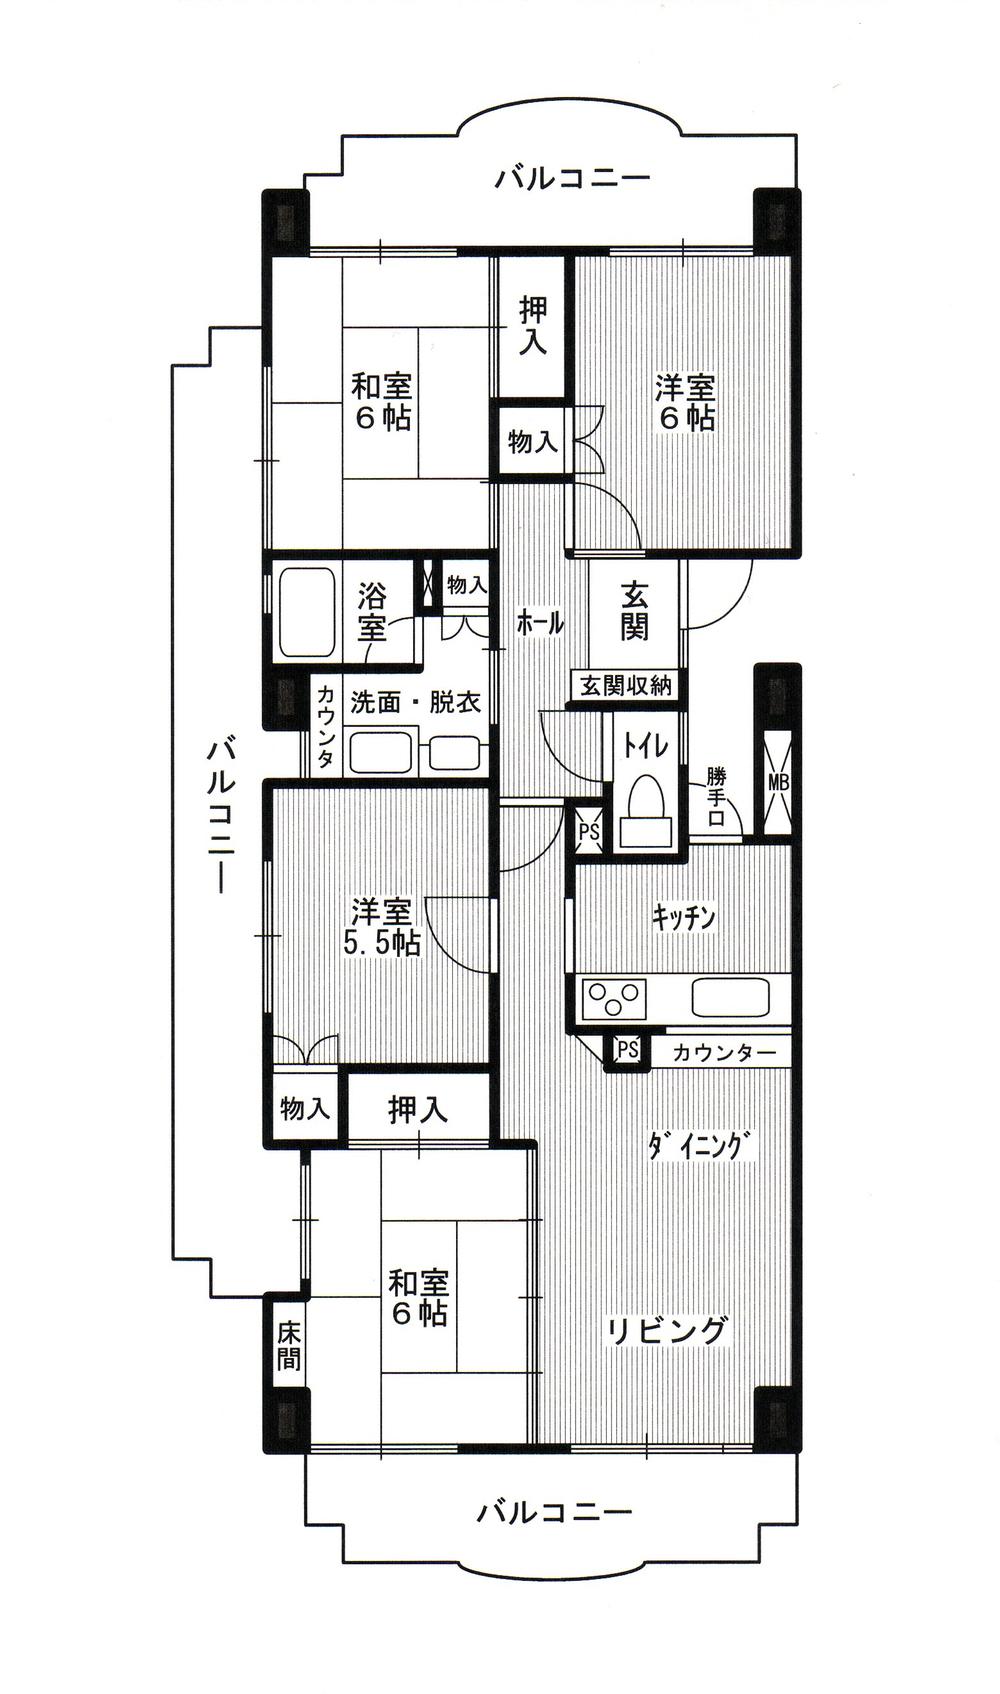 Floor plan. 4LDK, Price 13.8 million yen, Occupied area 79.33 sq m , Top-floor balcony area 27.76 sq m southwest angle dwelling unit. View is good. Is new construction as well clean!